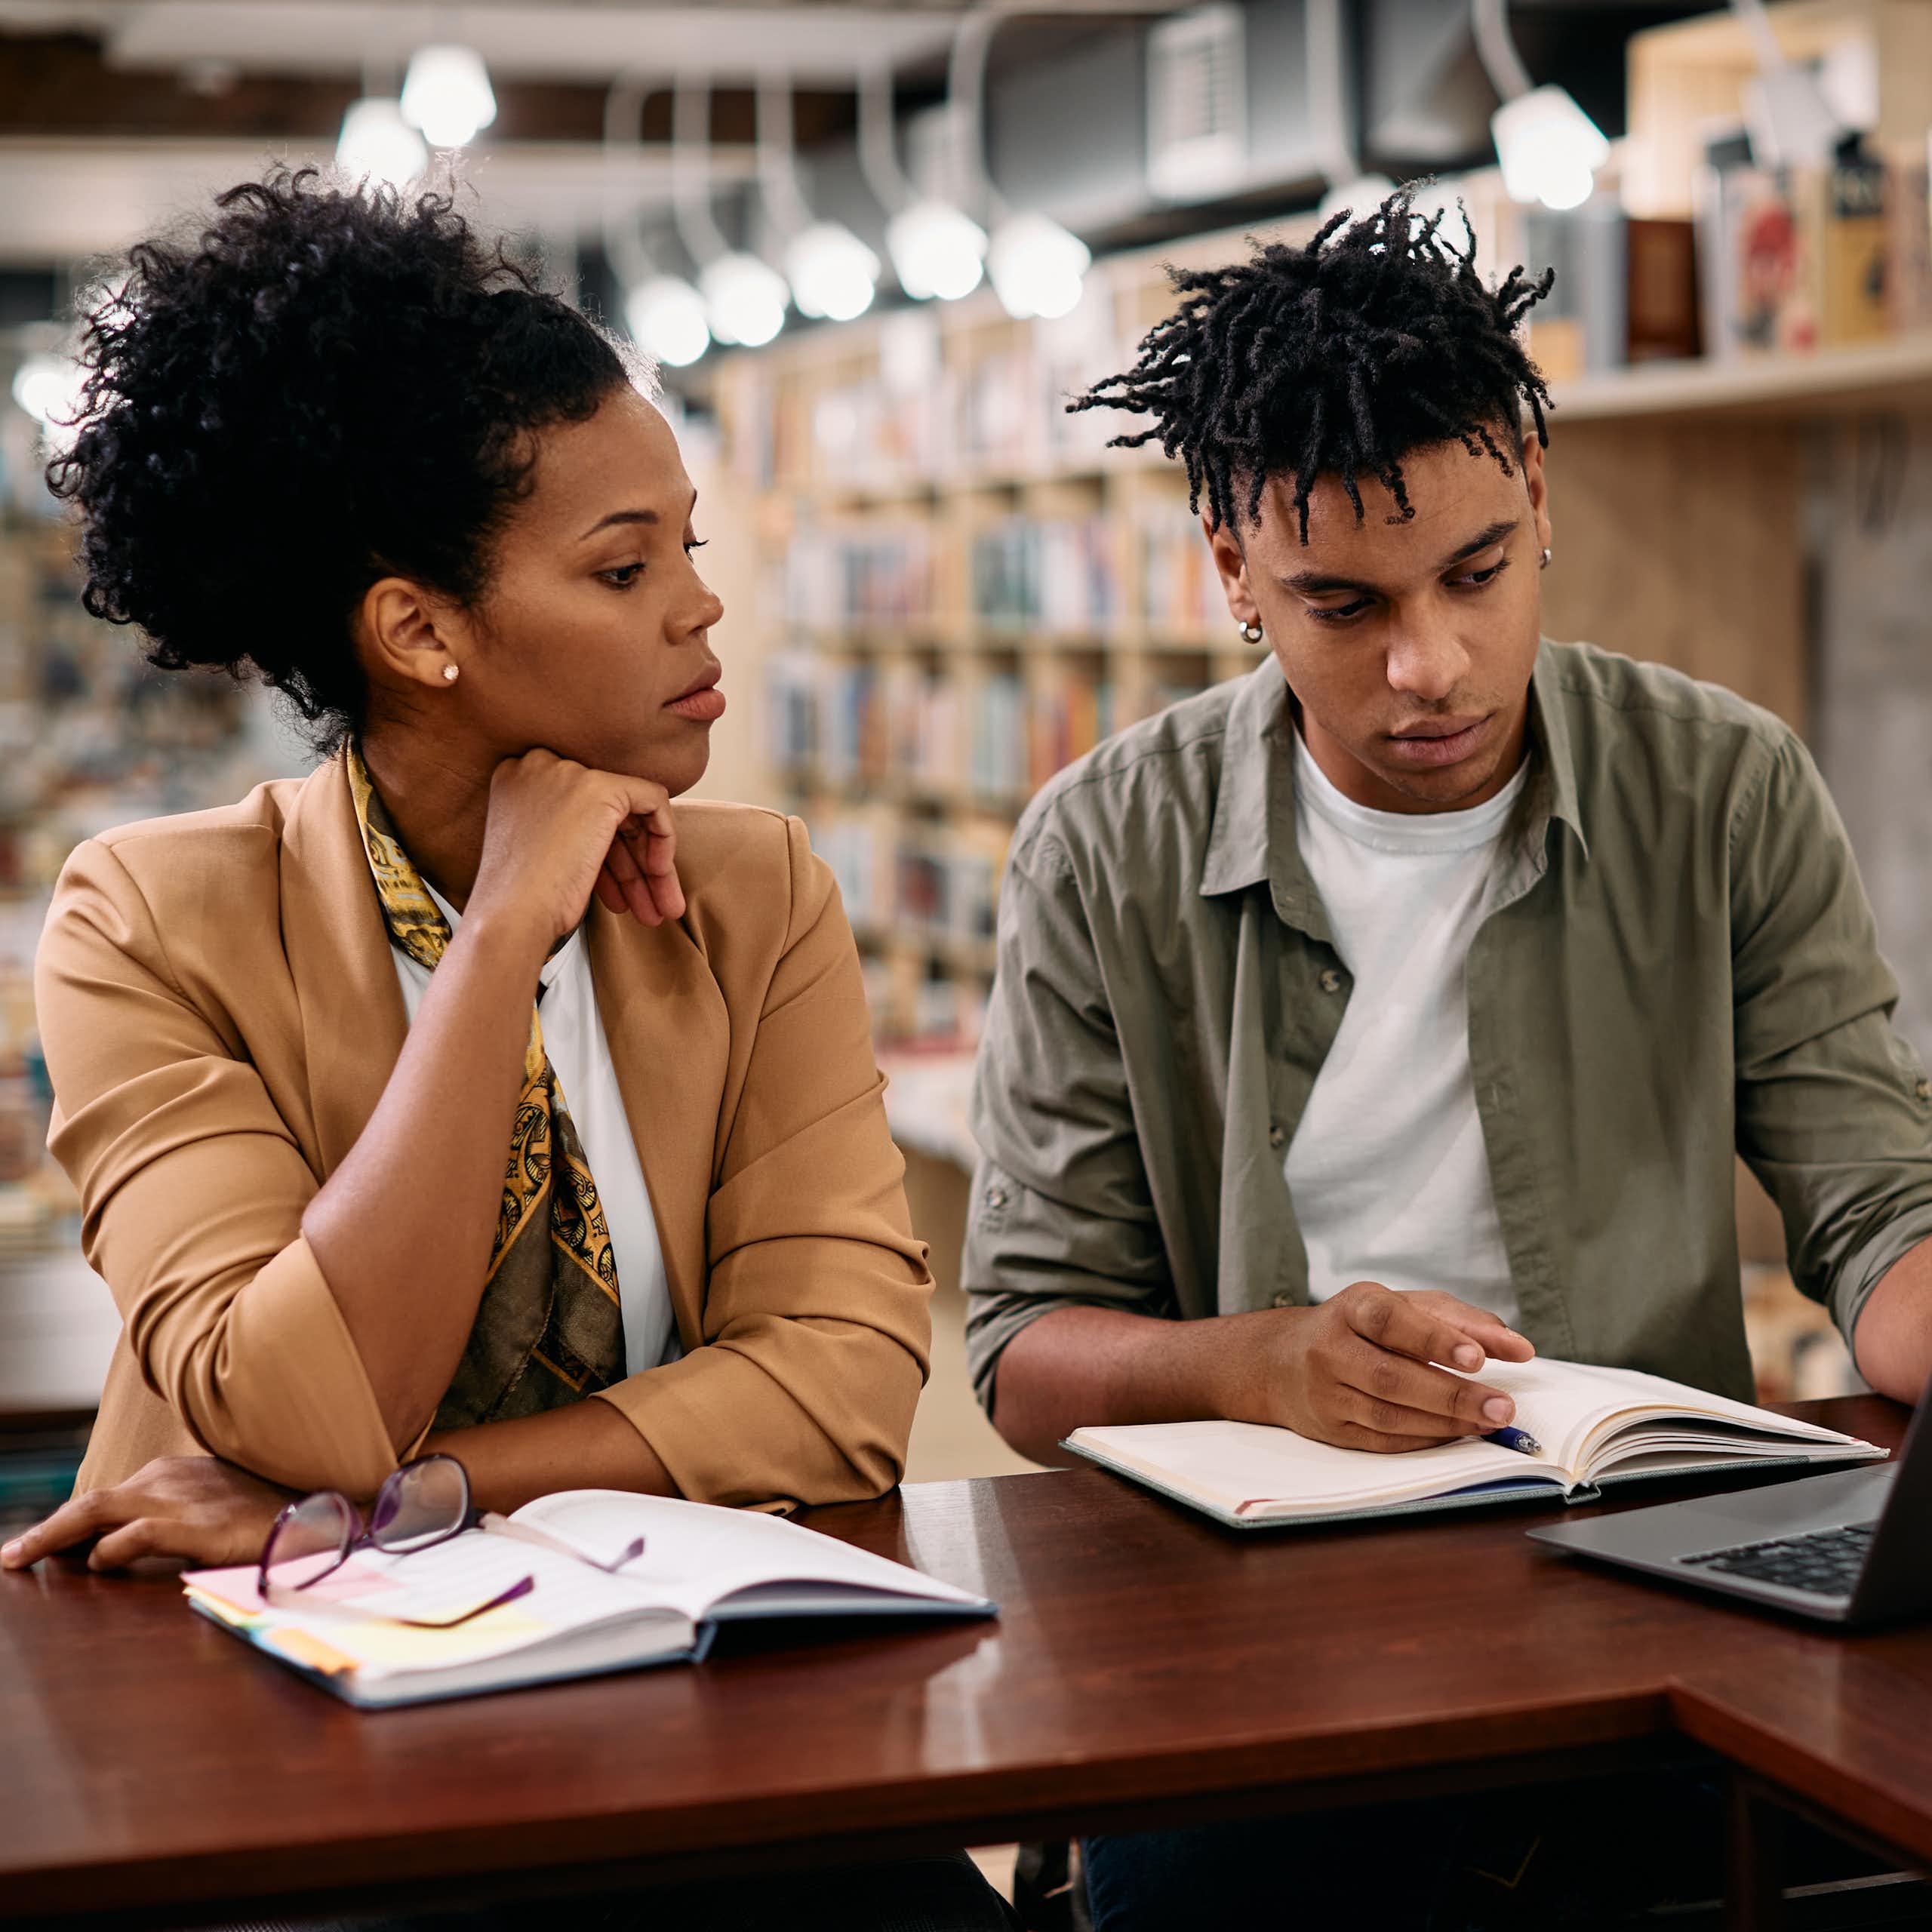 Black man and woman studying in library